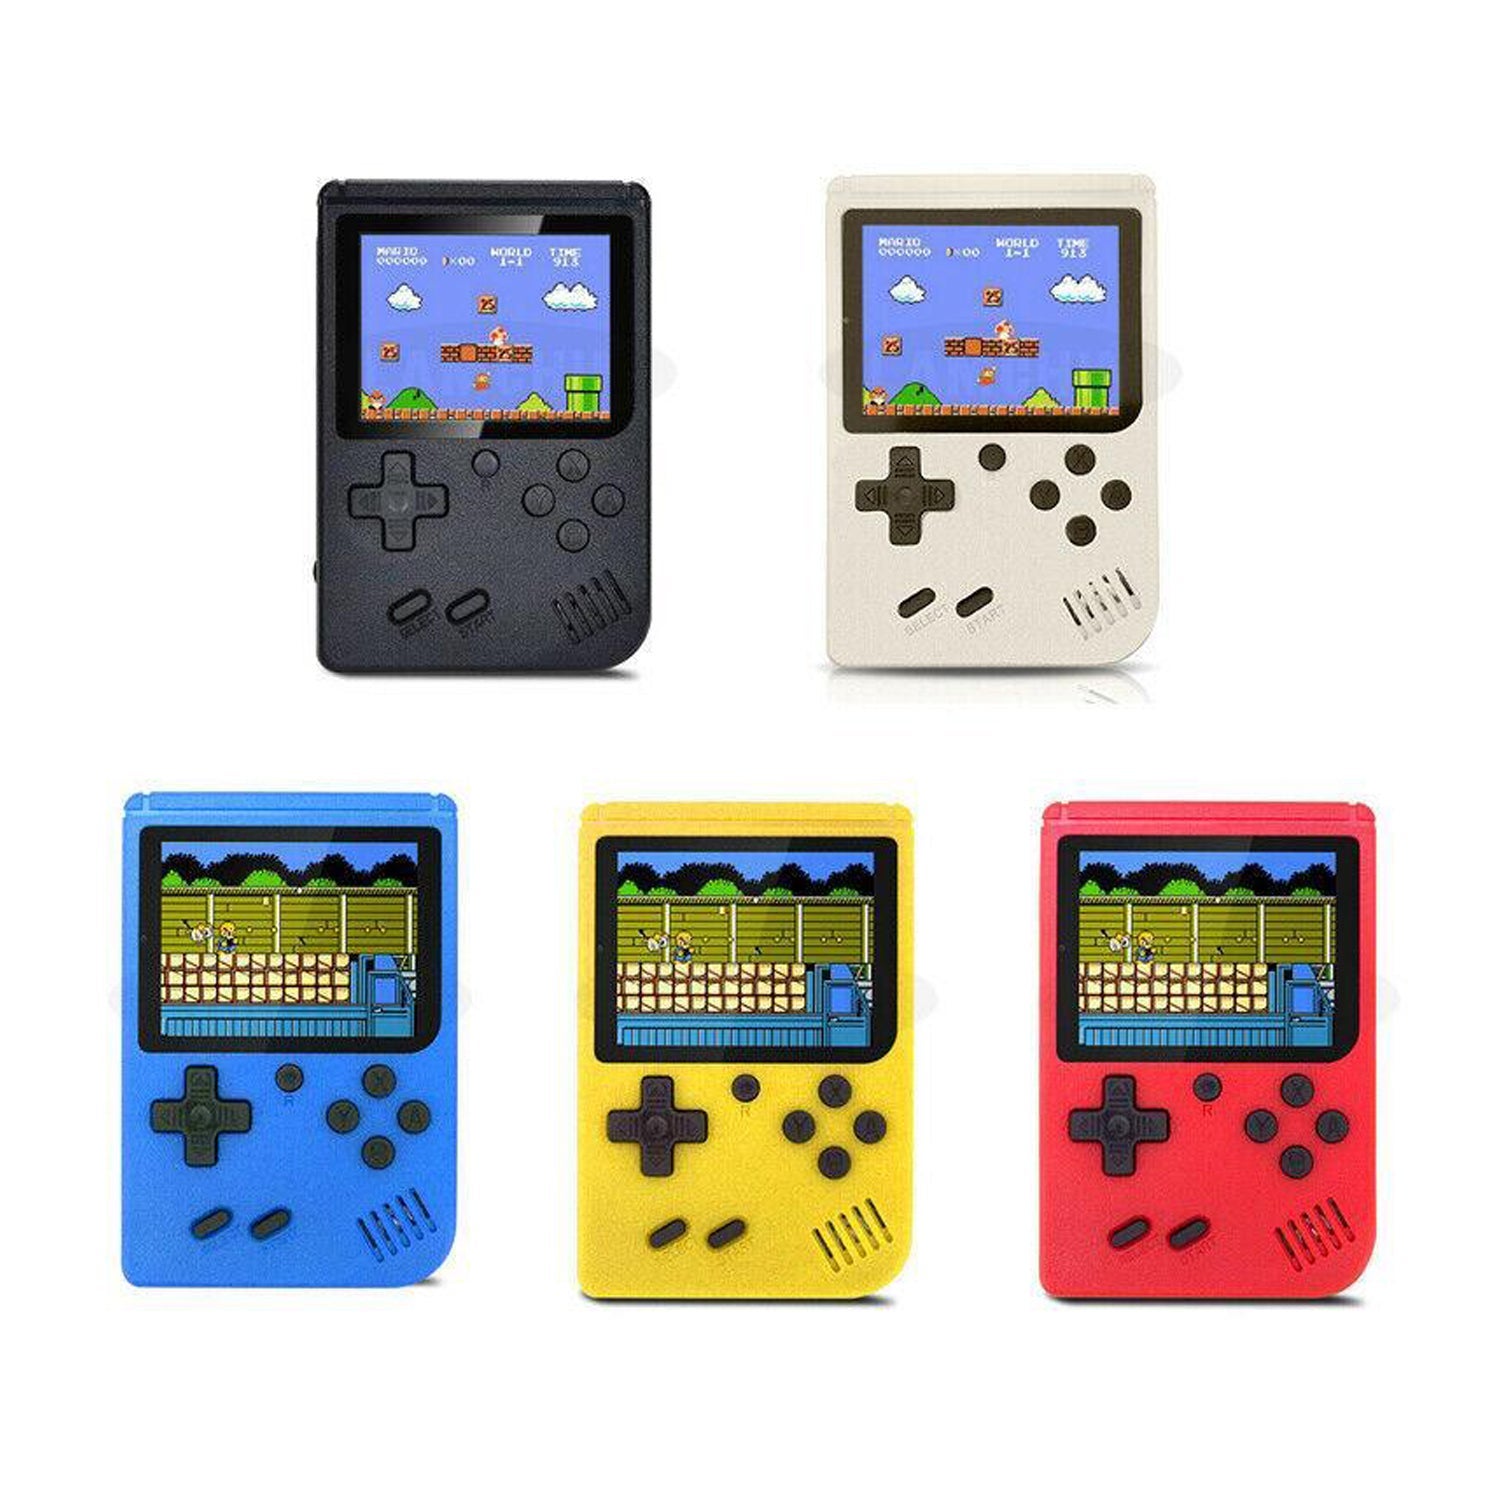 Video Game Hand Held Retro Gameboy Console - 400 Classic Games